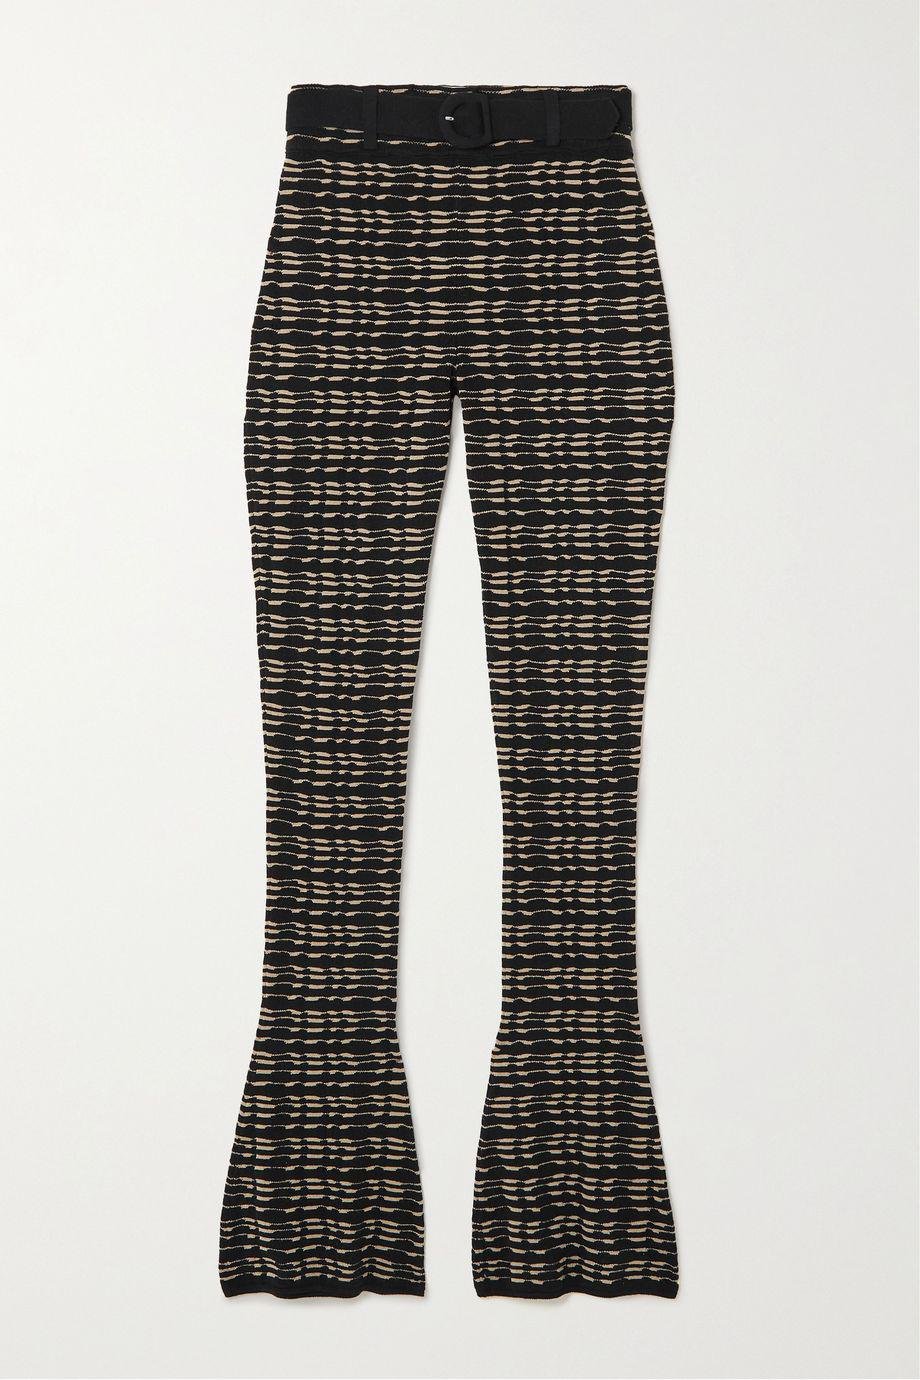 + NET SUSTAIN belted jacquard-knit flared pants by CONNER IVES